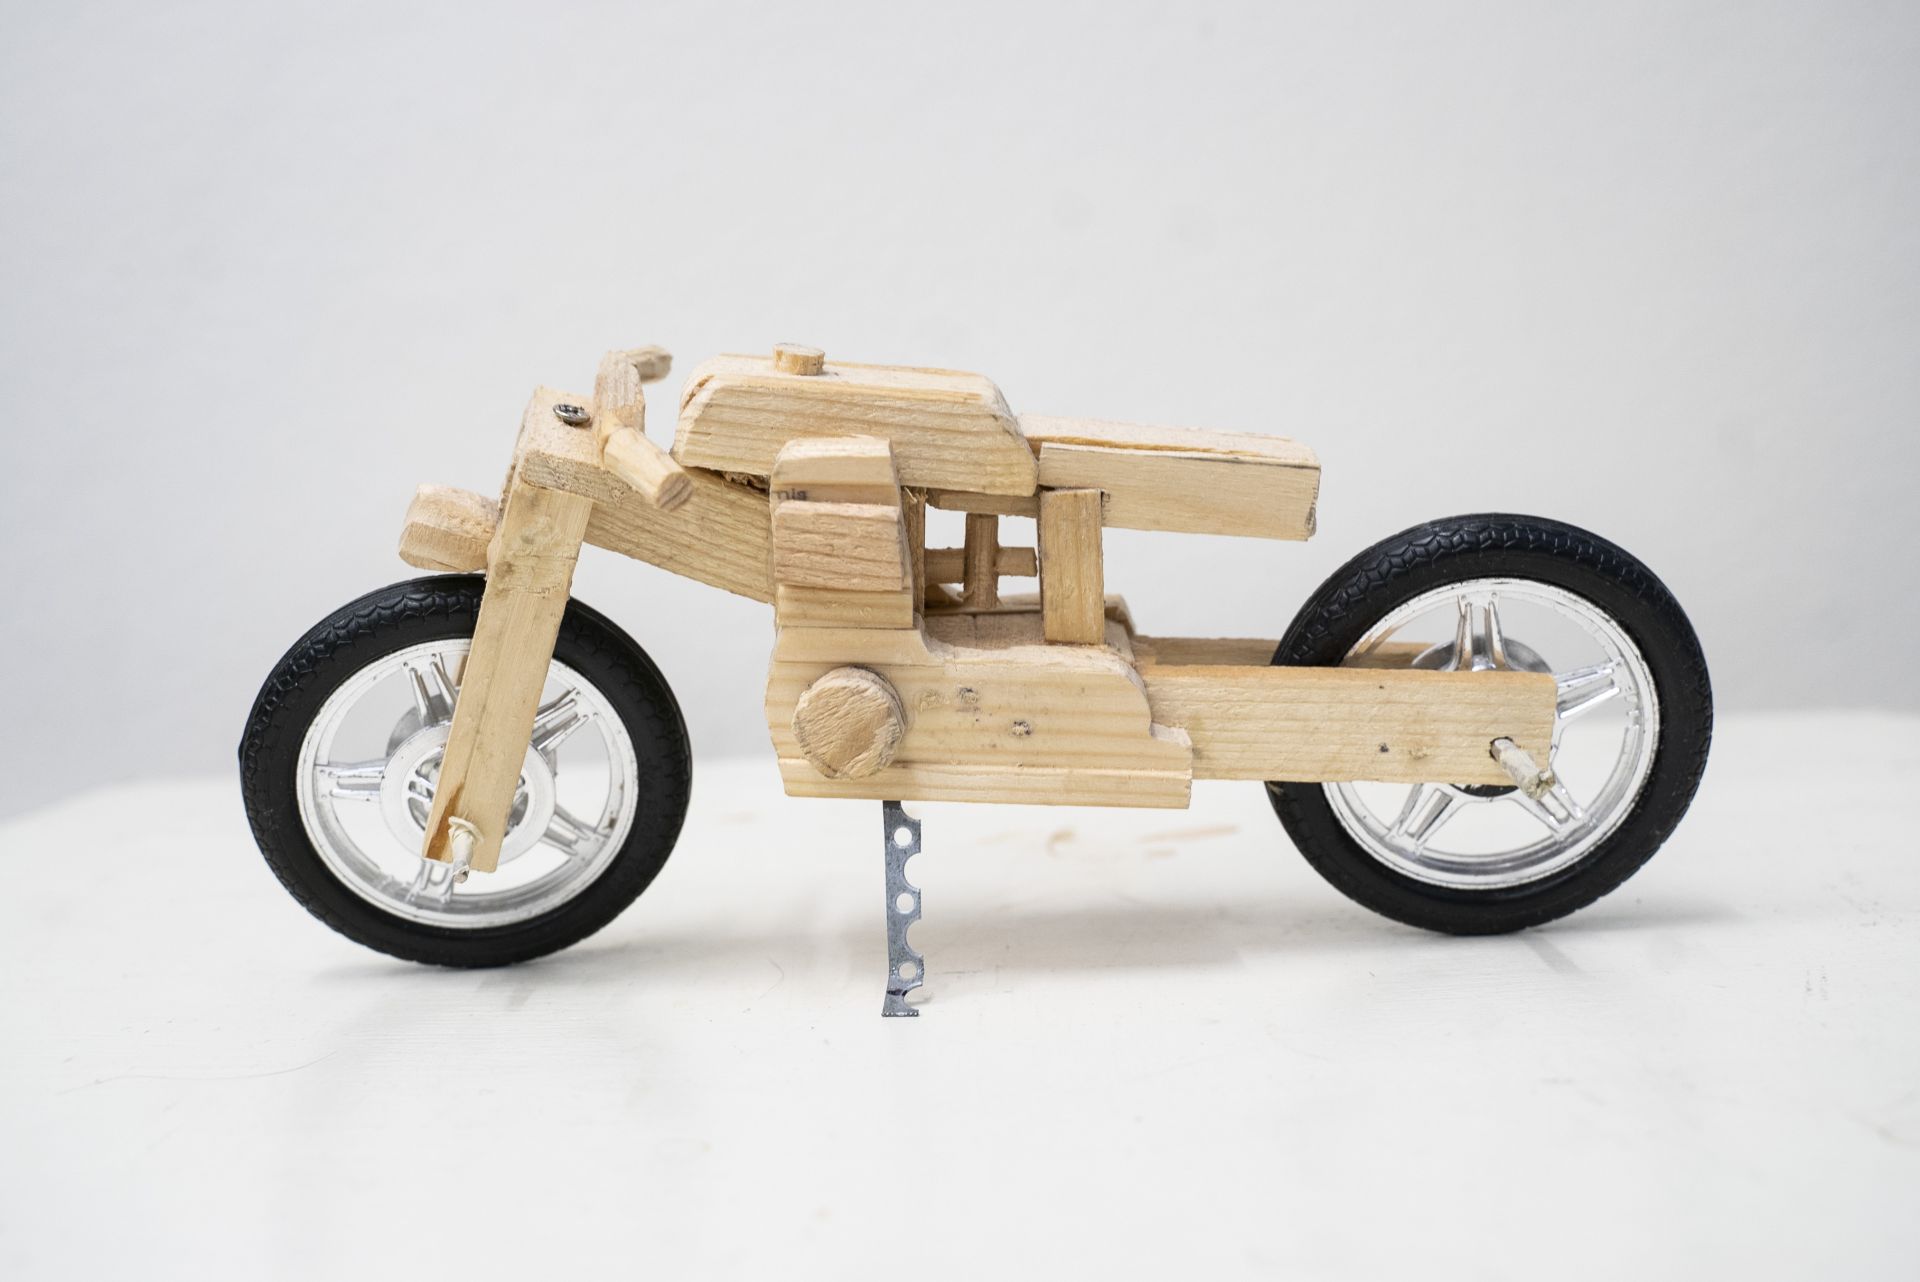 Miniature of a motorcycle Harley Davidson. The miniature is made of wood and metallic details. 